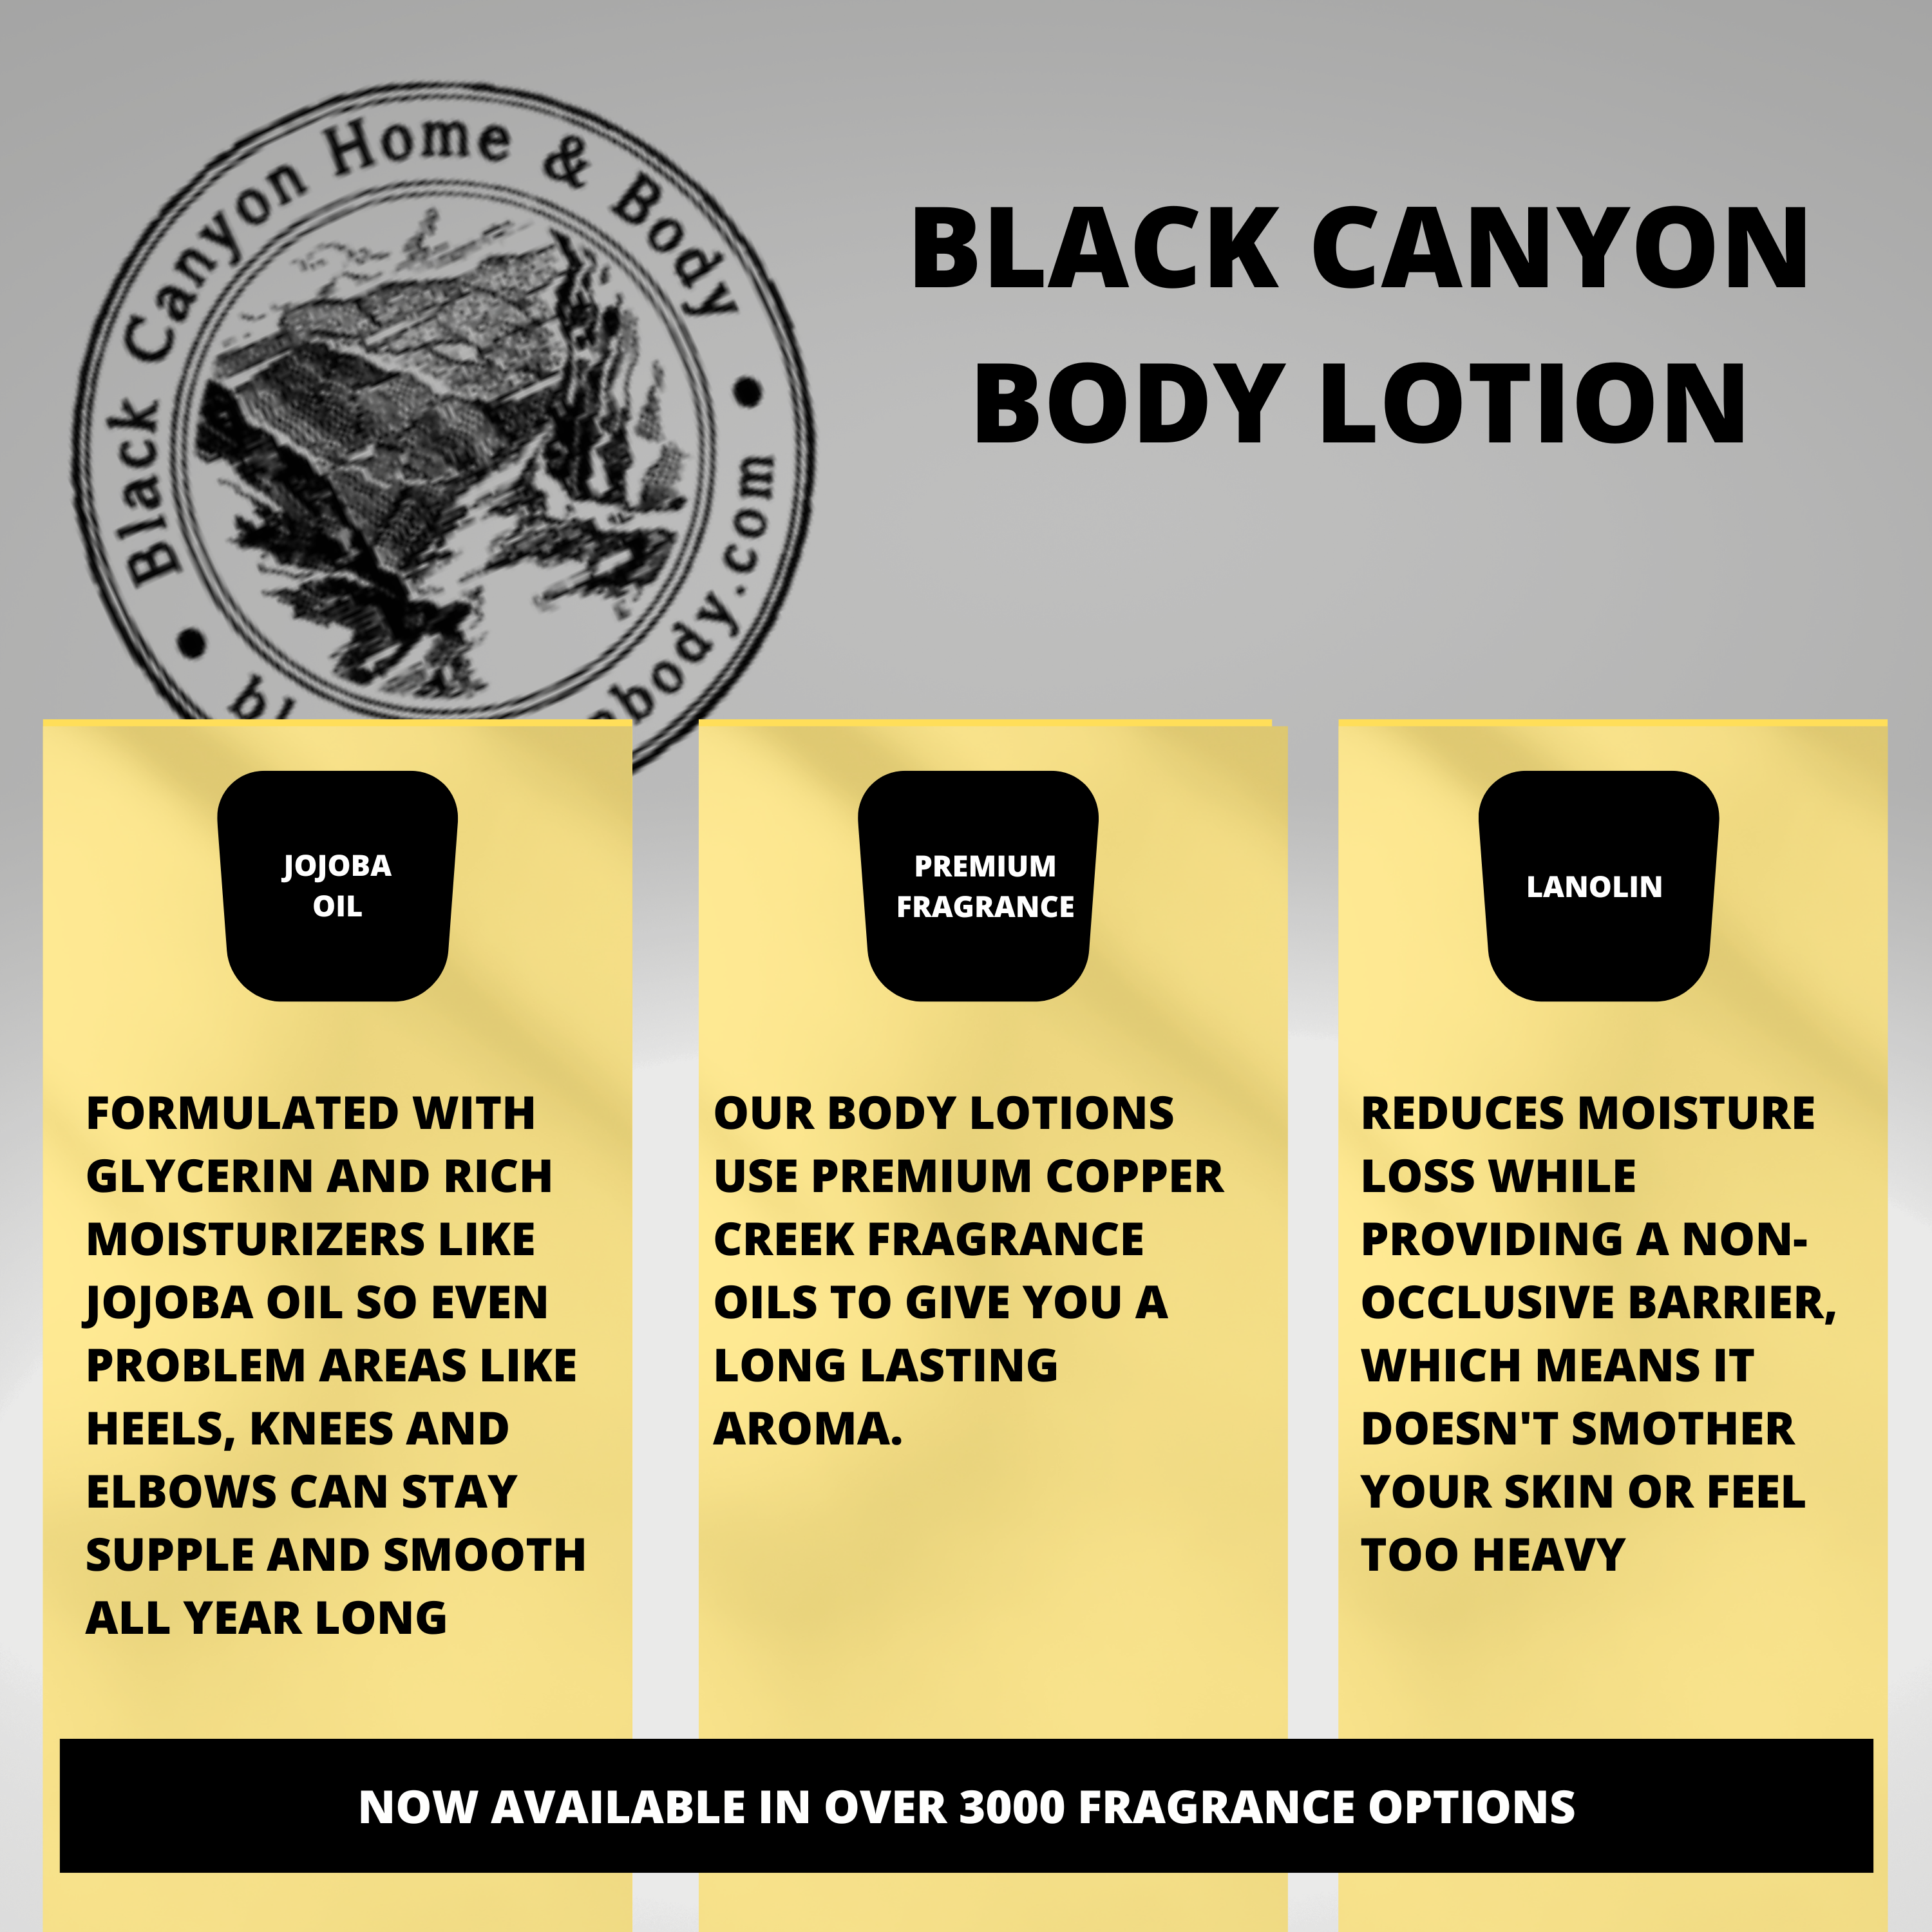 Black Canyon Aloe Musk Scented Luxury Body Lotion with Lanolin and Jojoba Oil